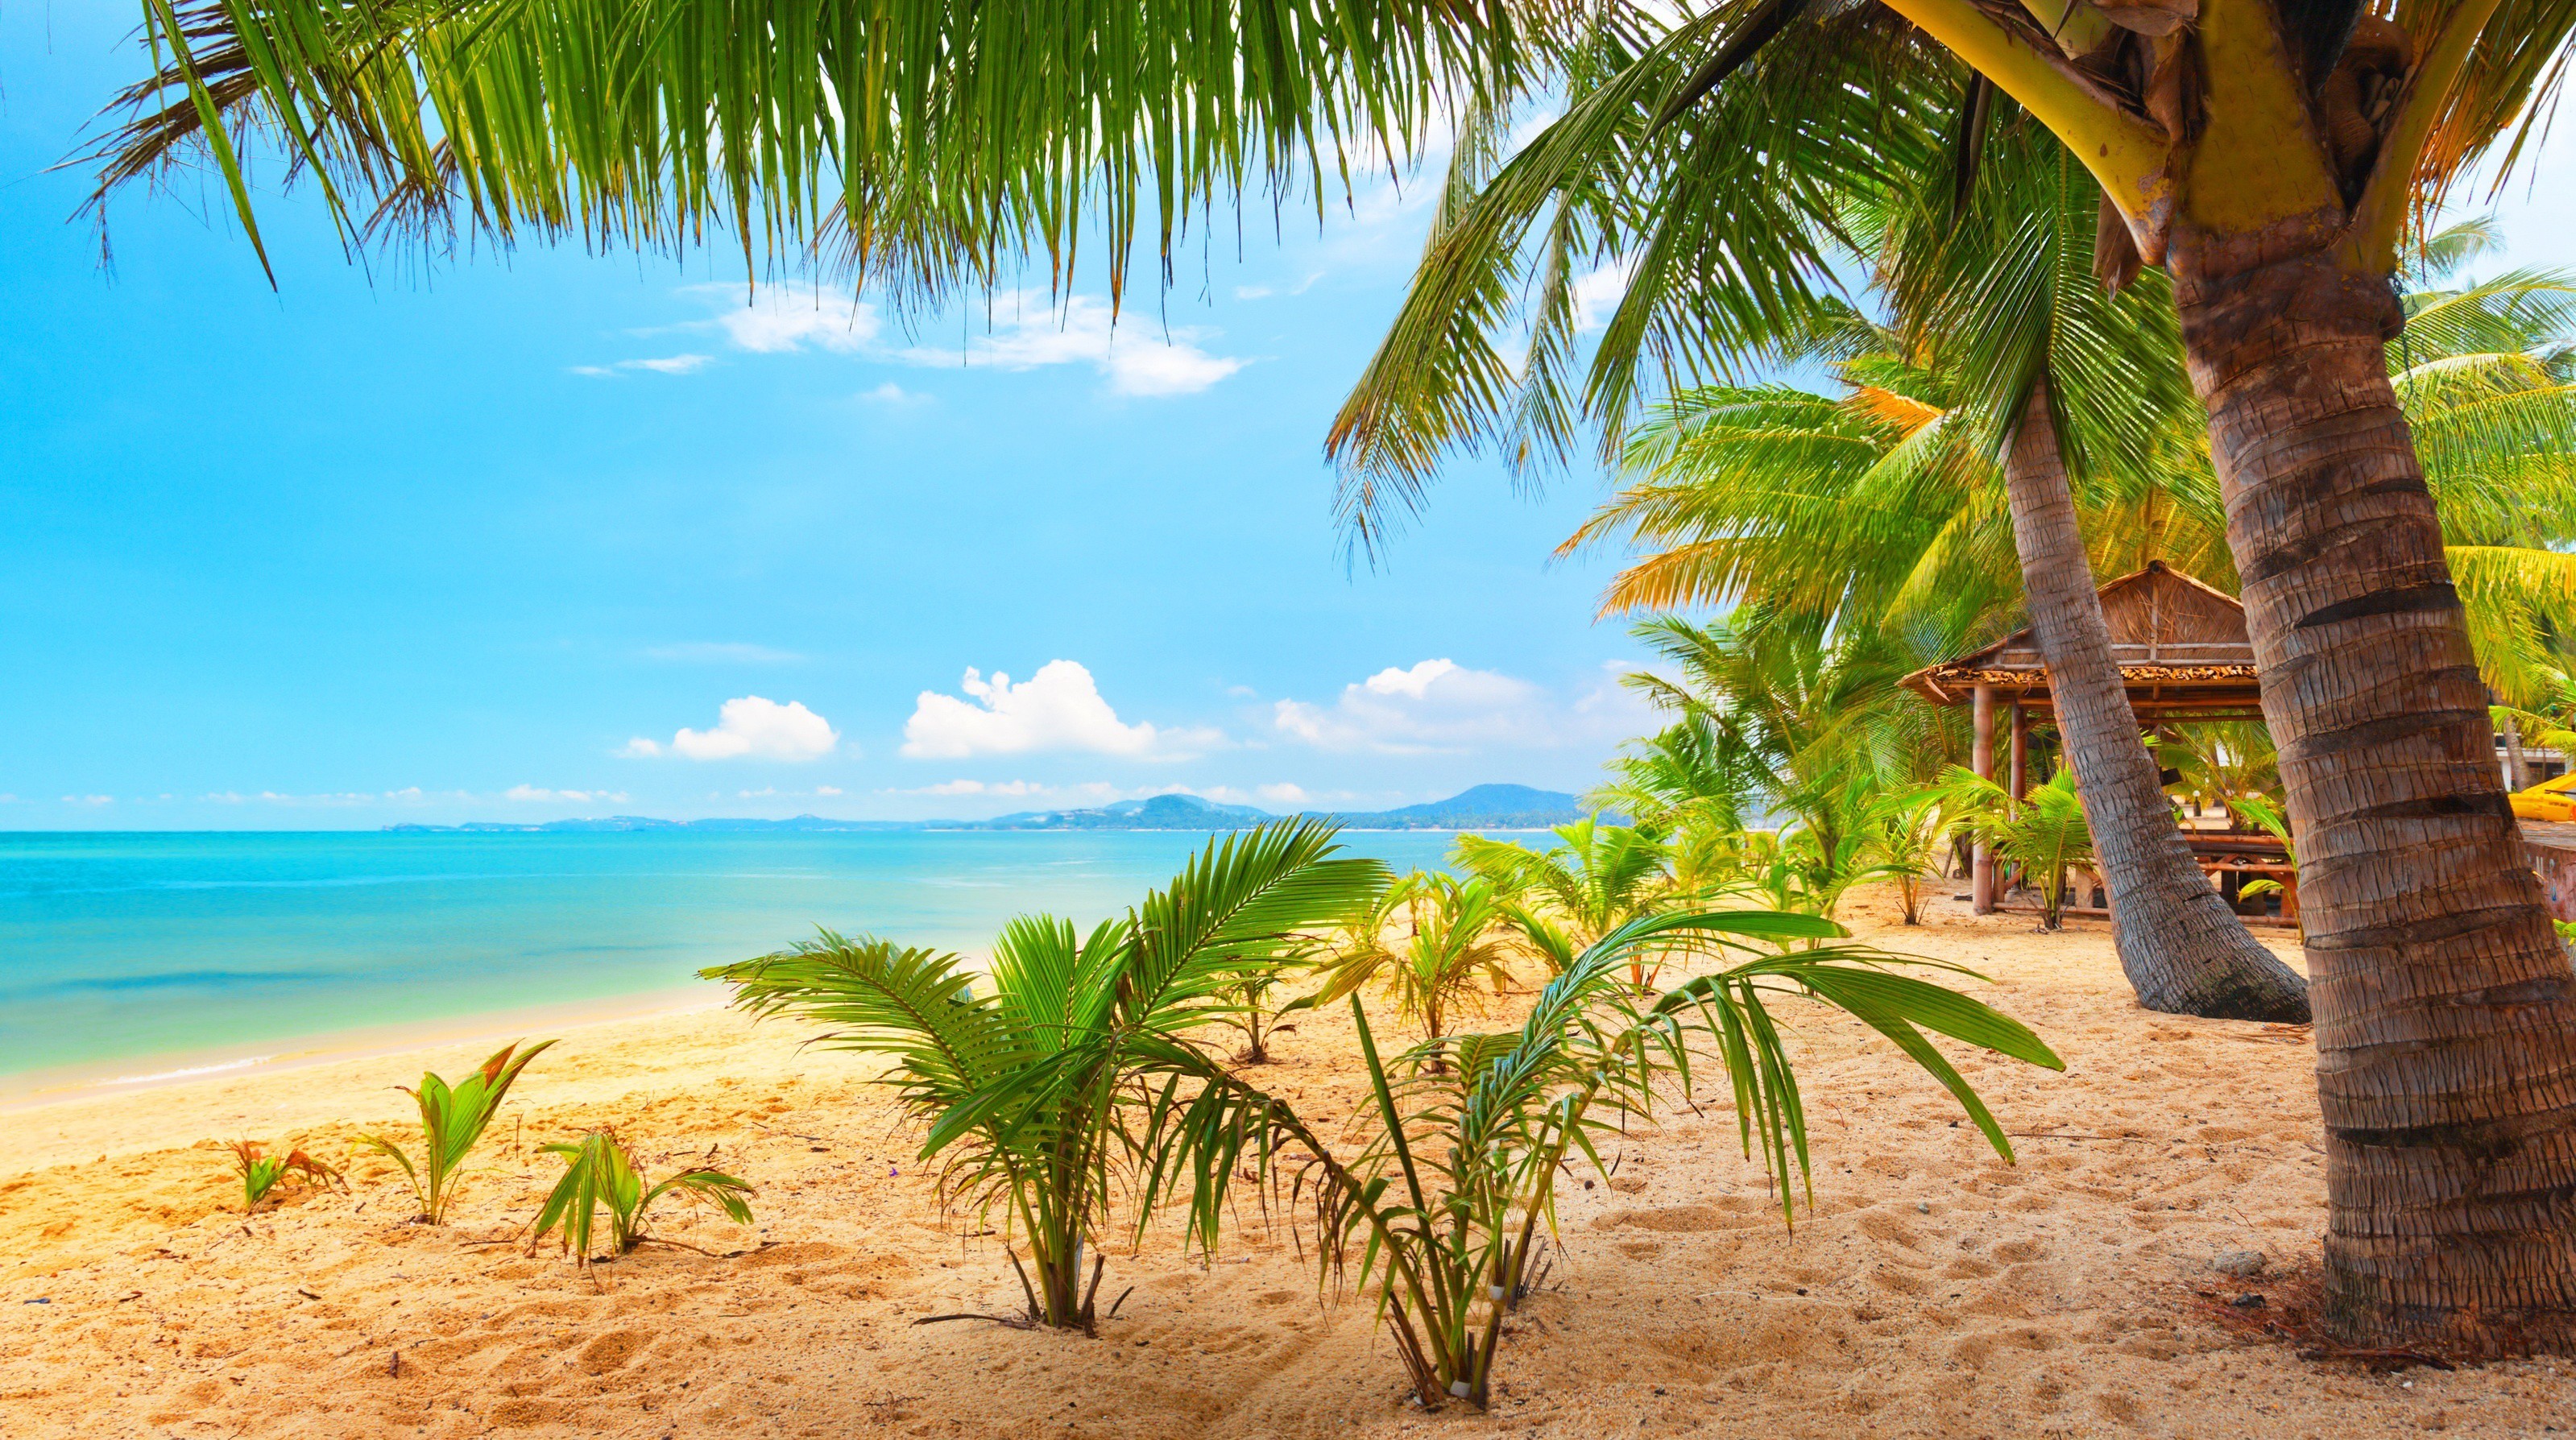 Wallpapers palm trees beach sand on the desktop